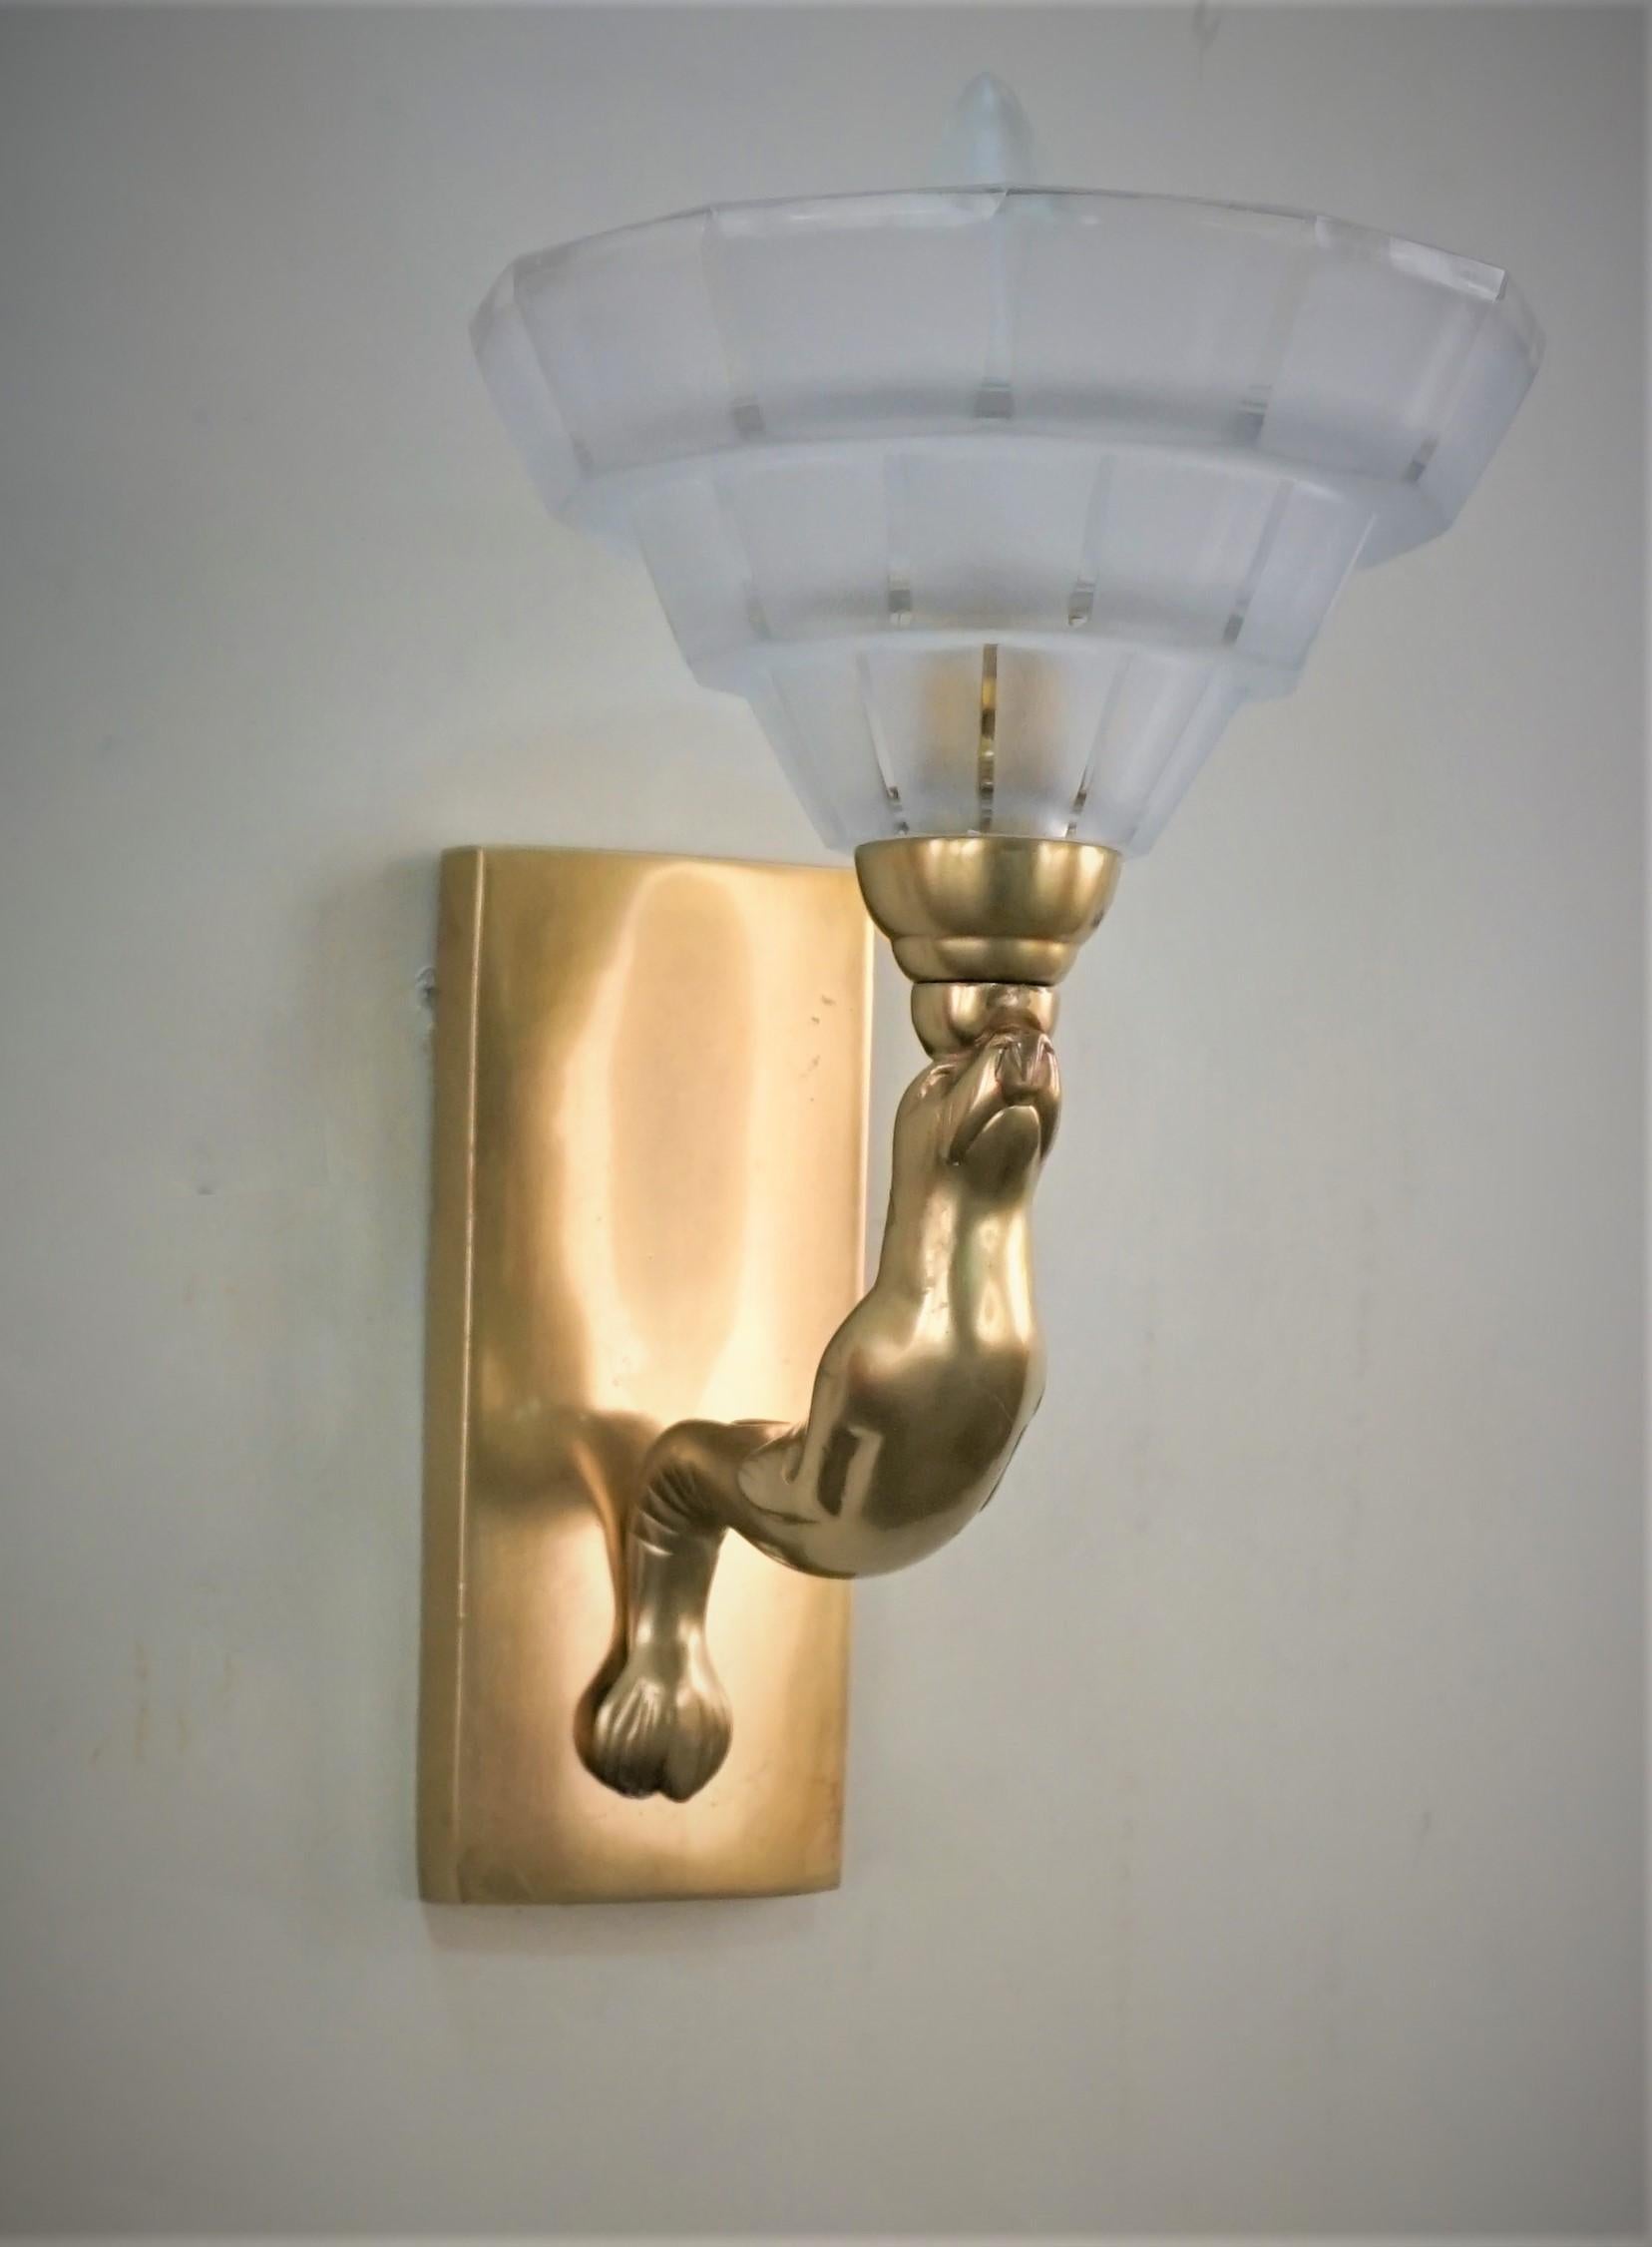 French Art Deco Seal Wall Sconces - 2 pairs For Sale 3